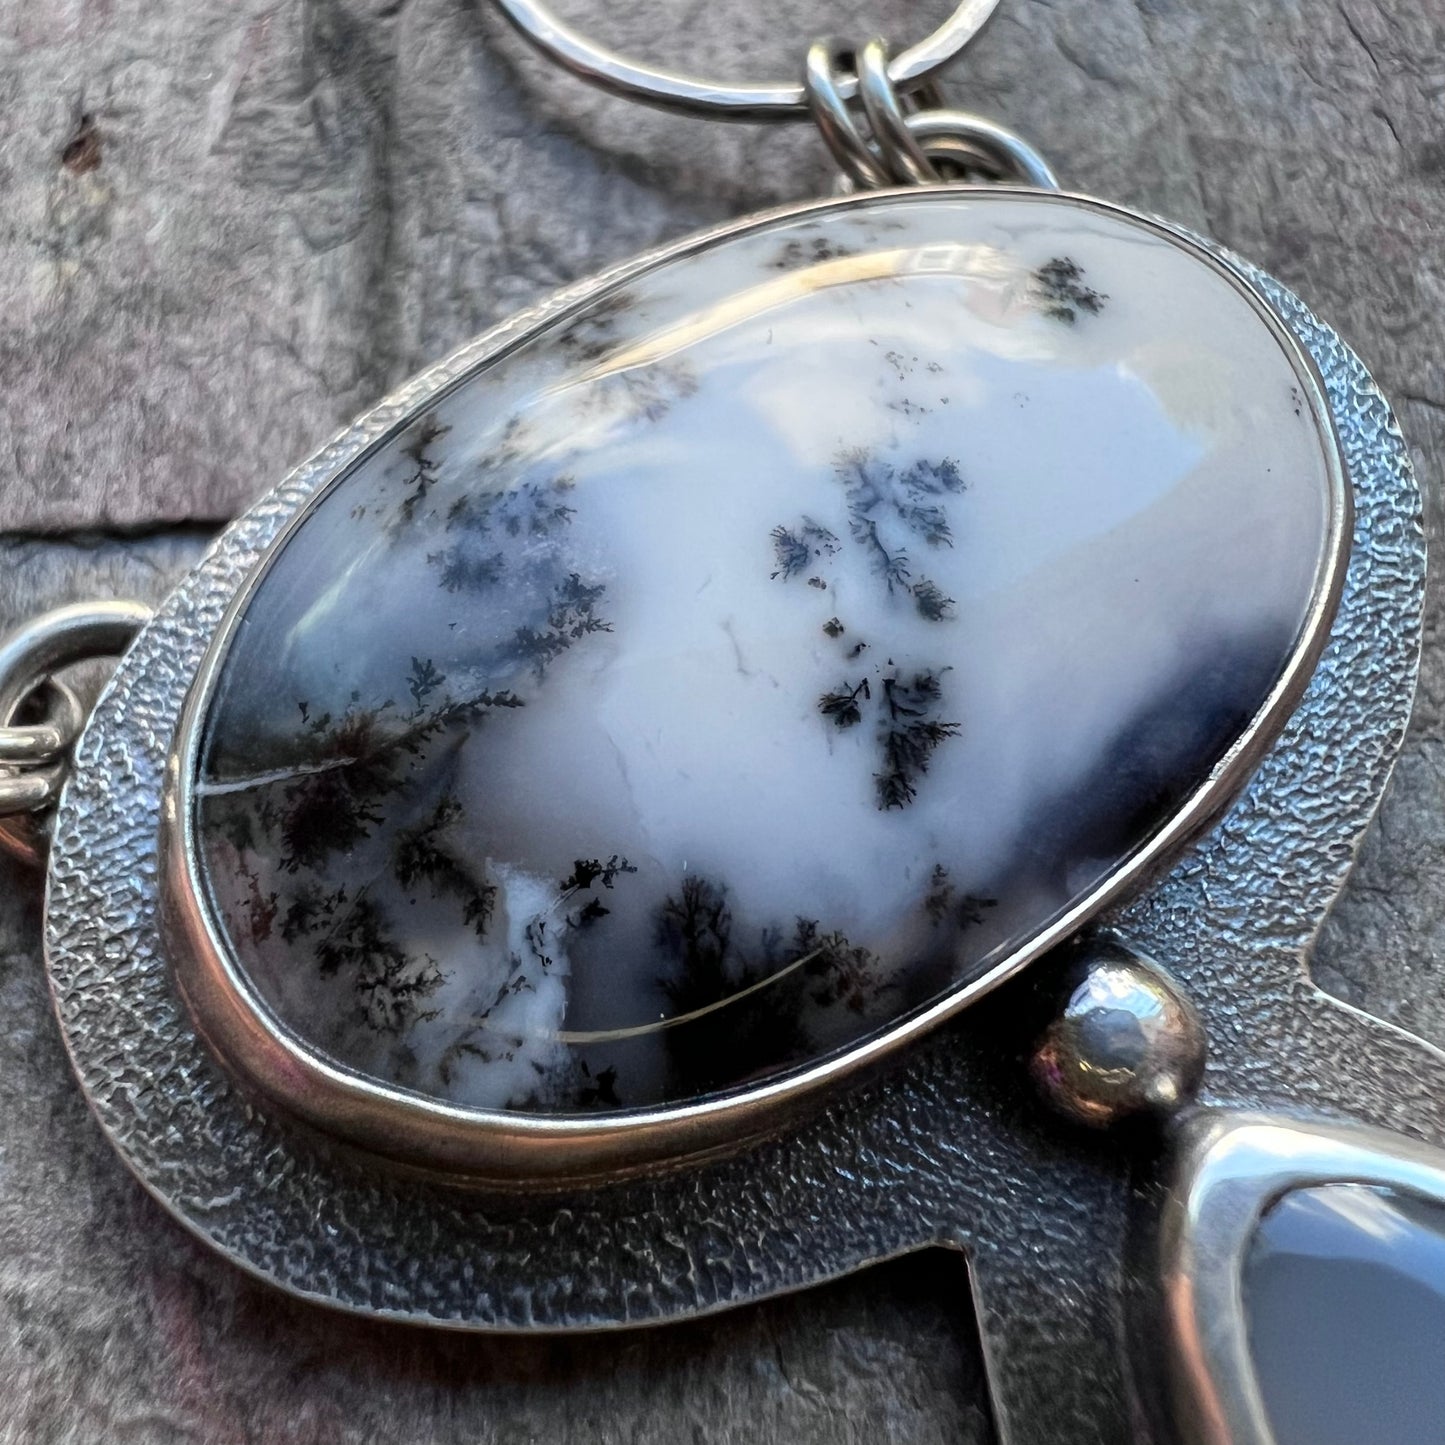 Dendritic Opal and Chalcedony Sterling Silver Necklace - Handmade One-of-a-kind Pendant on Sterling Silver Chain